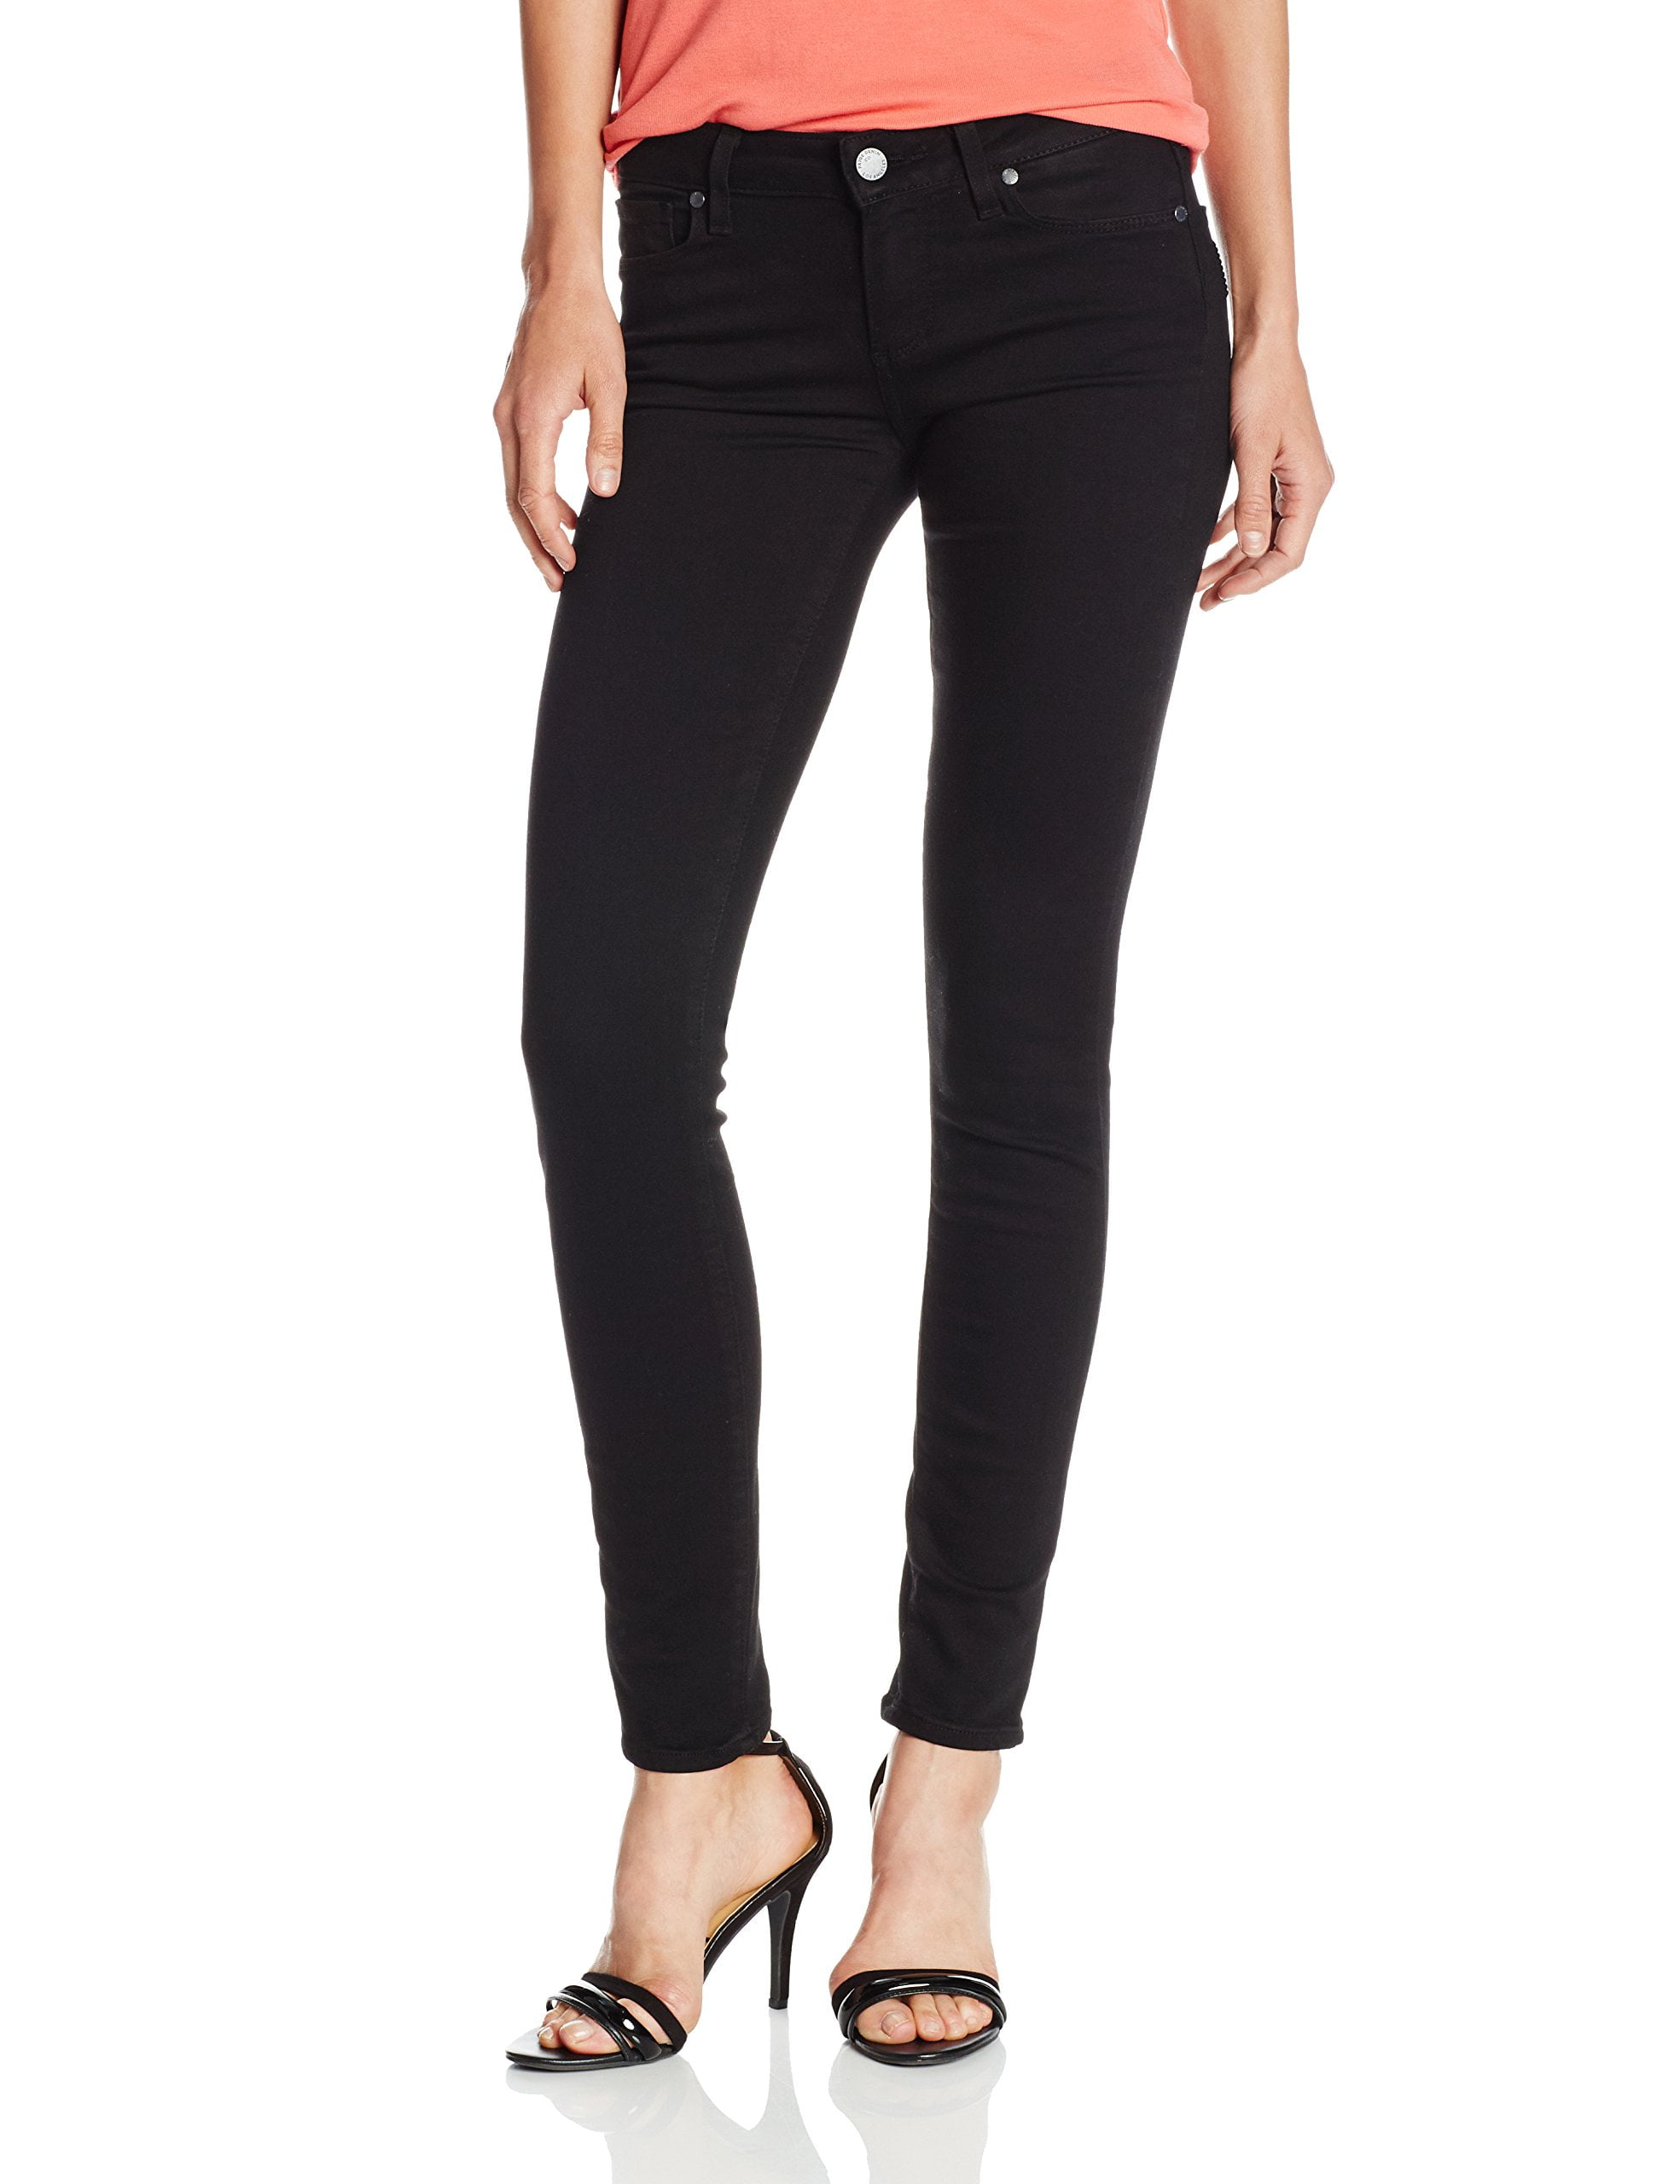 Paige Denim - Womens Verdugo Jeans Ankle Ultra Skinny Mid-Rise 26